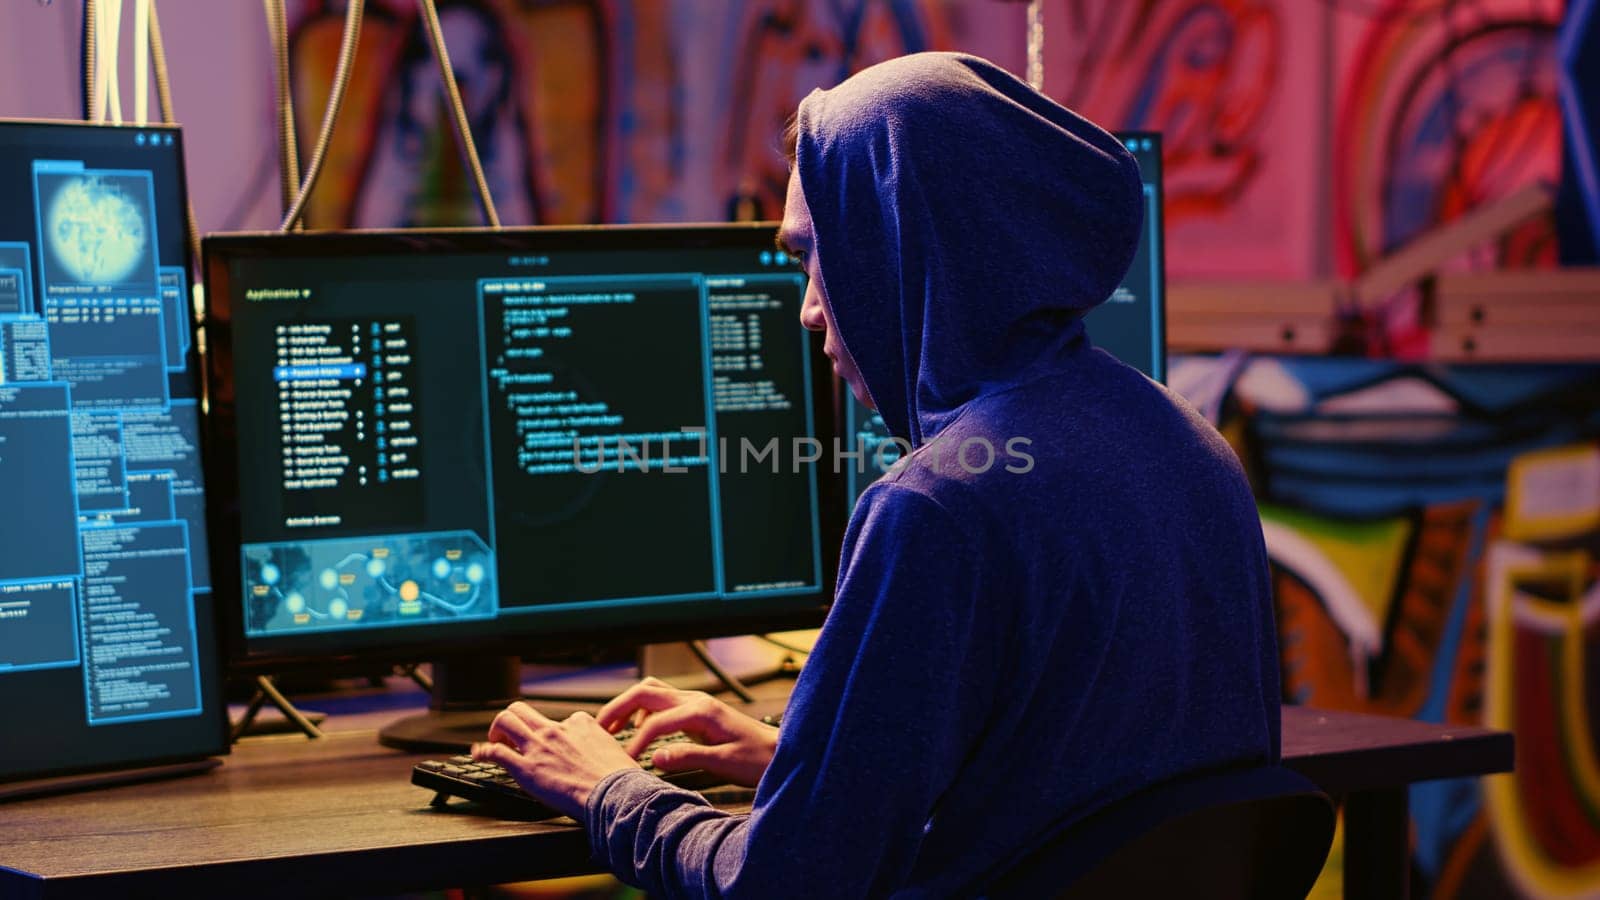 Hacker in graffiti painted hideaway base writing lines of code on computer, developing malware that get past security systems. Rogue programmer uses PC in bunker, running hacking script